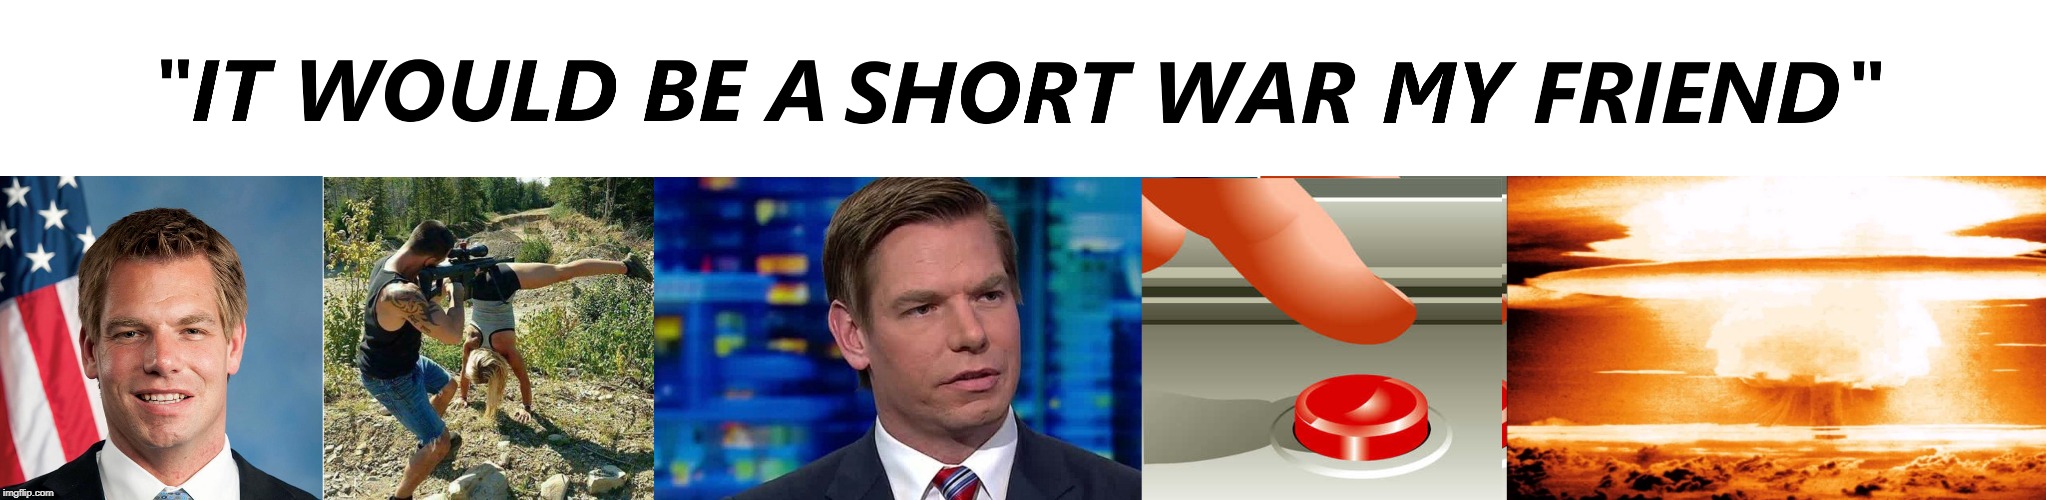 Self regulating political career | image tagged in swalwell,nuke em,gun control campaign excesses,twitter mistakes | made w/ Imgflip meme maker